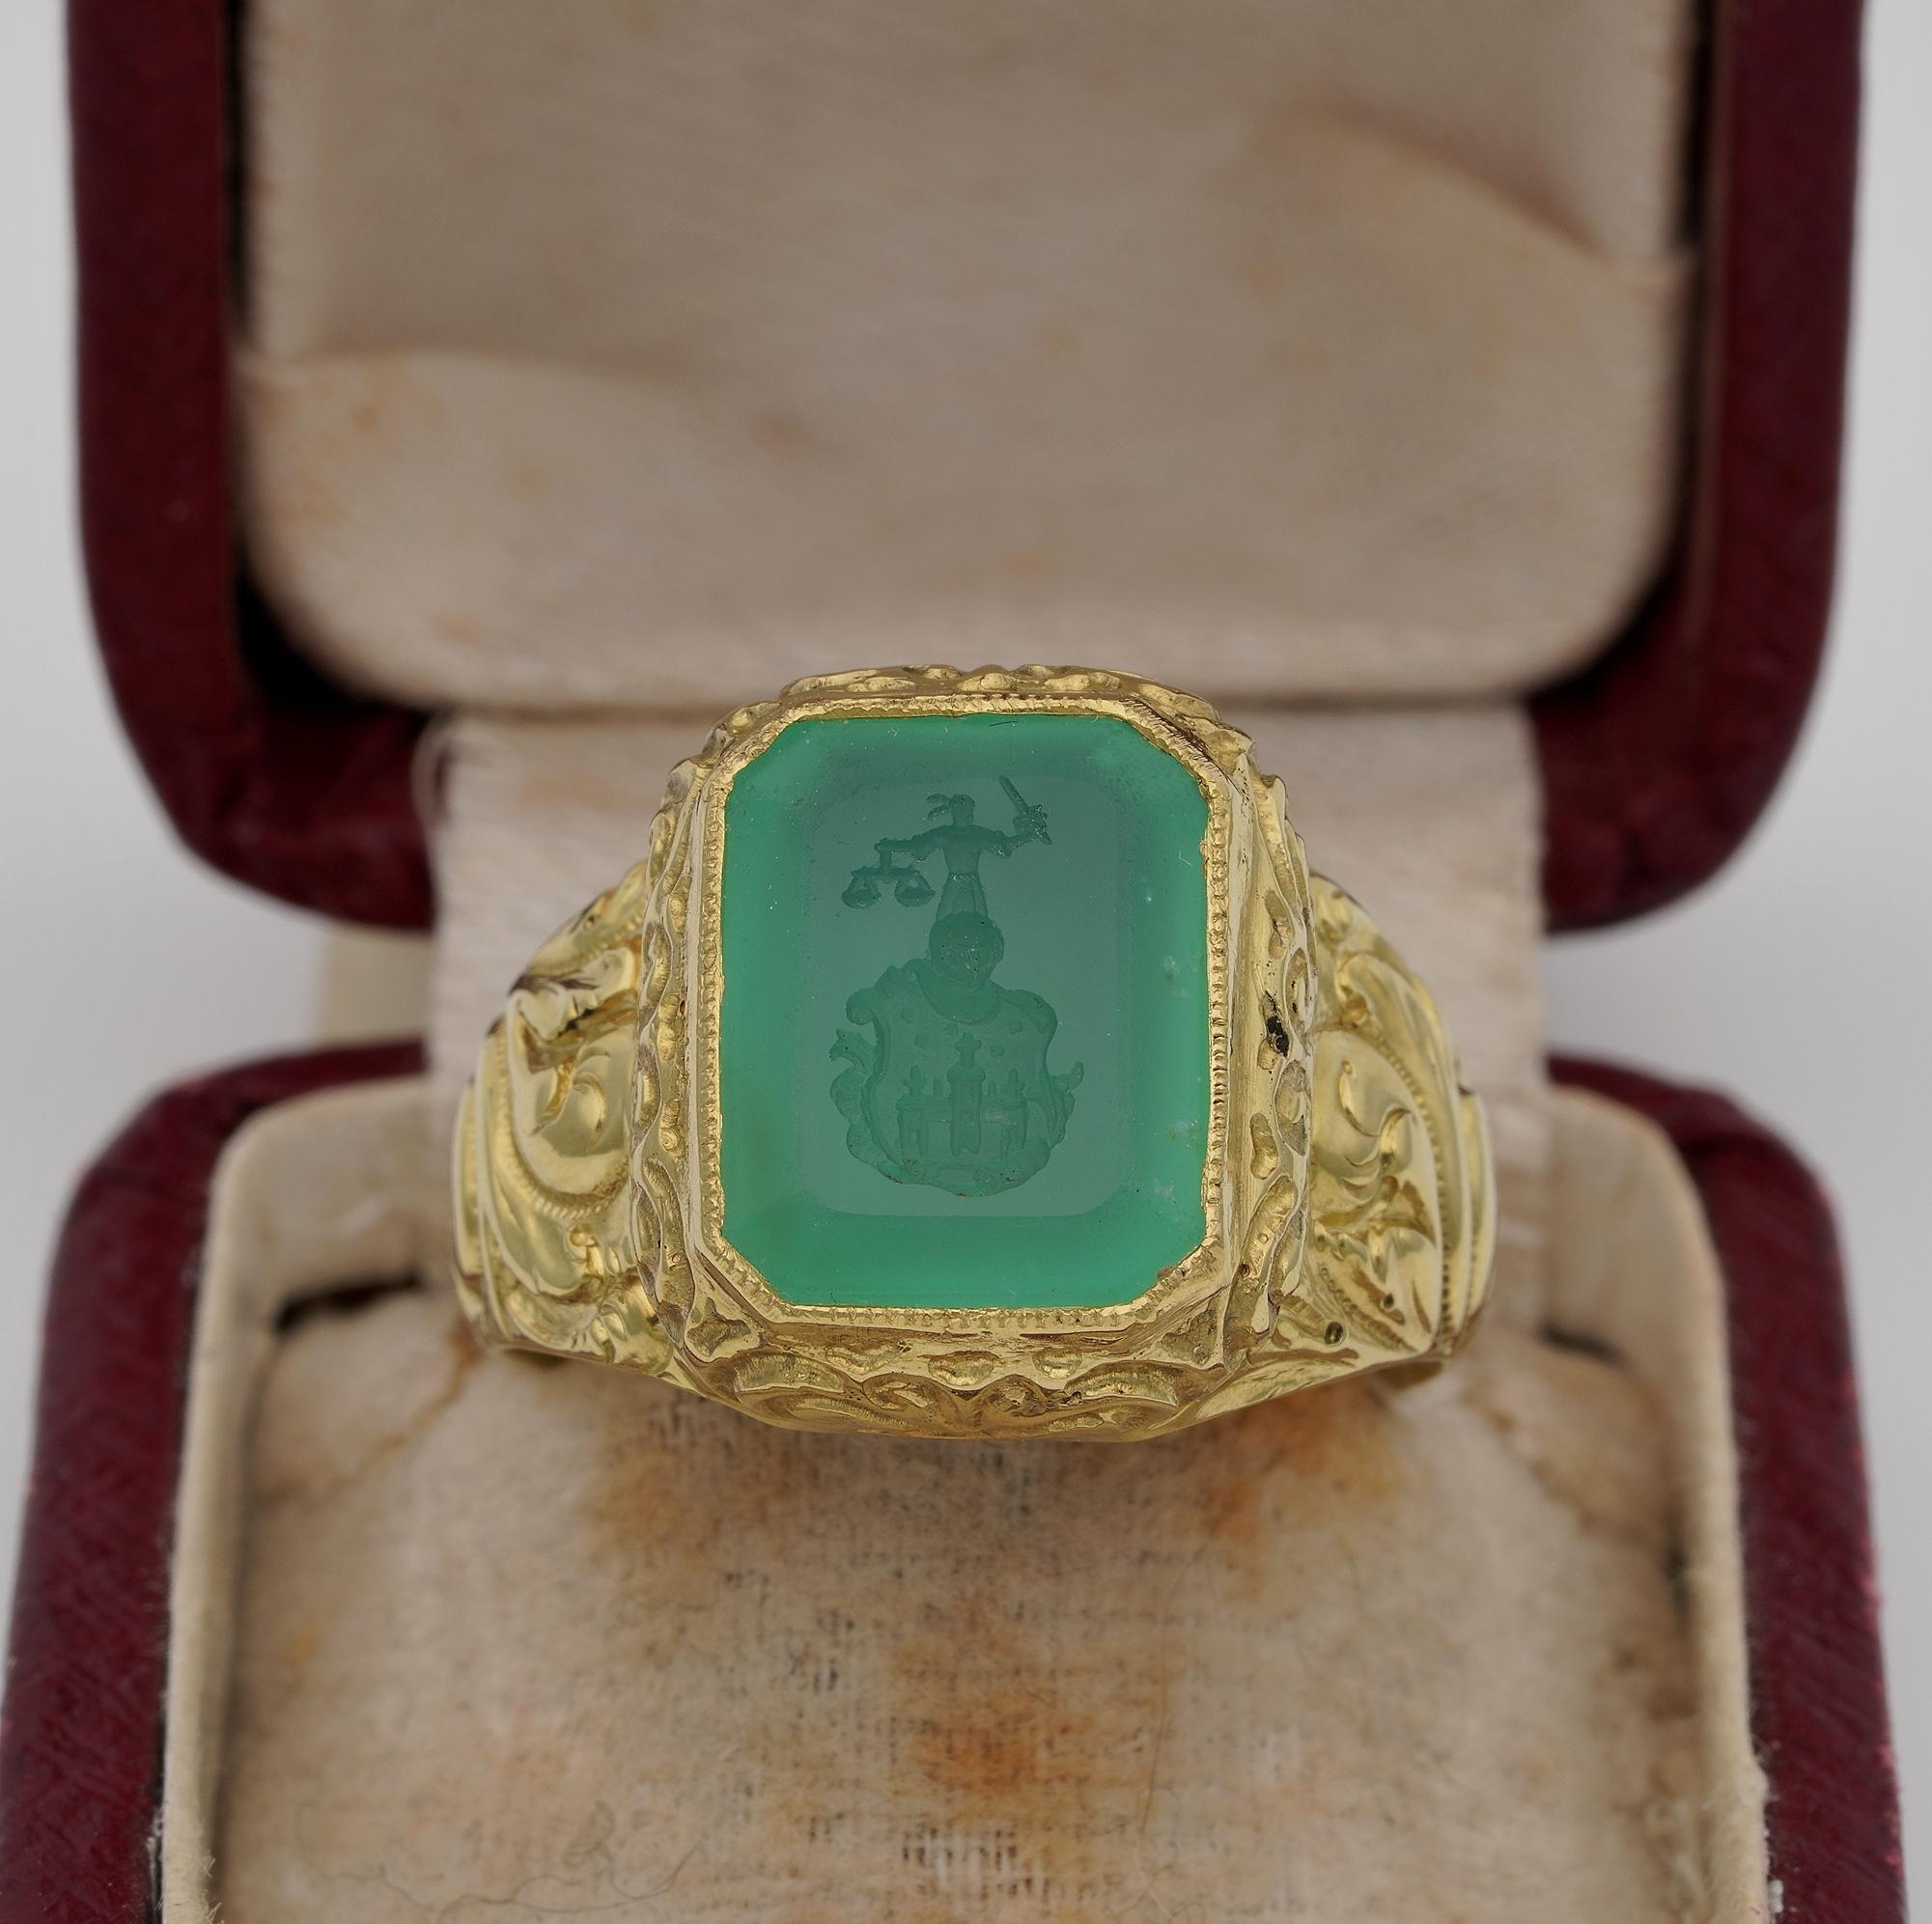 Status through History
Regency period 1820 /1840 ca, beautiful Intaglio signet ring, mounted in 18 karat yellow gold
Collet set with an Emerald cut Natural Green Prasiolite also called Green Amethyst (tested) carved with an intaglio of Coat of Arms